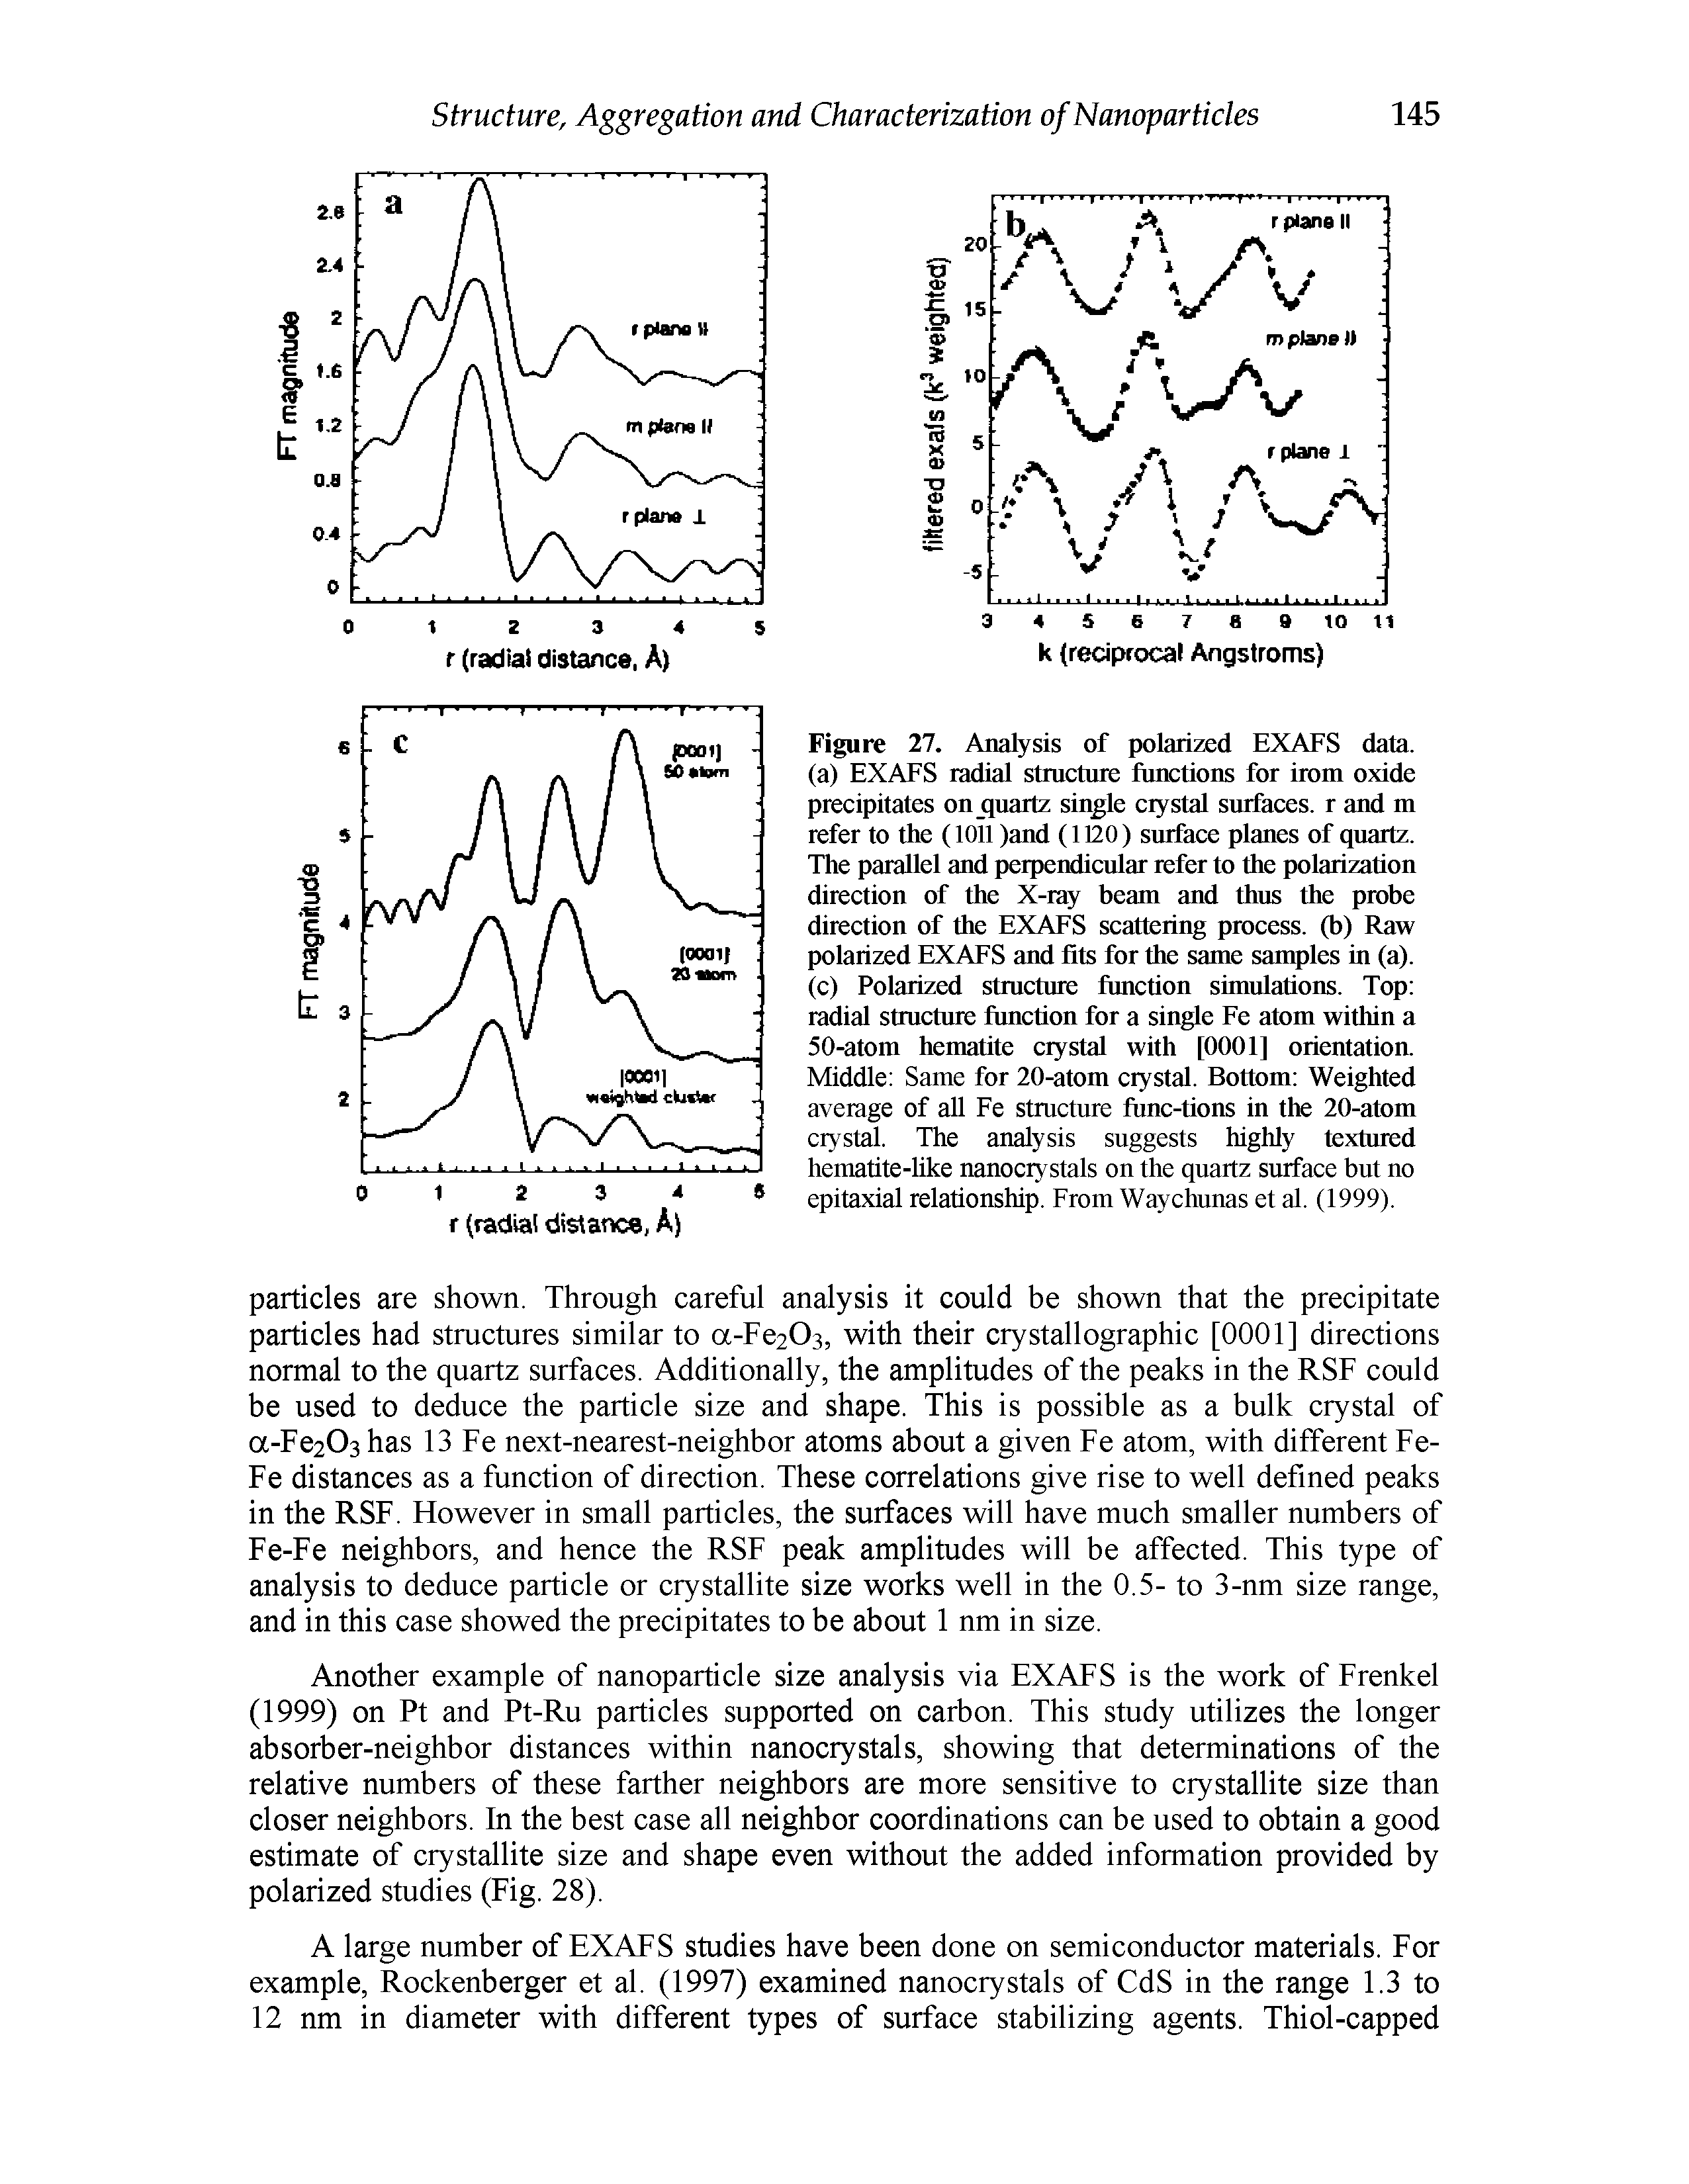 Figure 27. Analysis of polarized EXAFS data, (a) EXAFS radial structure functions for irom oxide precipitates on quartz single crystal surfaces, r and m refer to the (1011 )and (1120) surface planes of quartz. The parallel and perpendicular refer to the polarization direction of the X-ray beam and thus the probe direction of the EXAFS scattering process, (b) Raw polarized EXAFS and fits for the same samples in (a), (c) Polarized stracture function simulations. Top radial stracture function for a single Fe atom within a 50-atom hematite crystal with [0001] orientation. Middle Same for 20-atom crystal. Bottom Weighted average of all Fe stracture func-tions in the 20-atom crystal. The analysis suggests highly textrrred hematite-like nanocrystals on the quartz surface but no epitaxial relationship. From Waychunas et al. (1999).